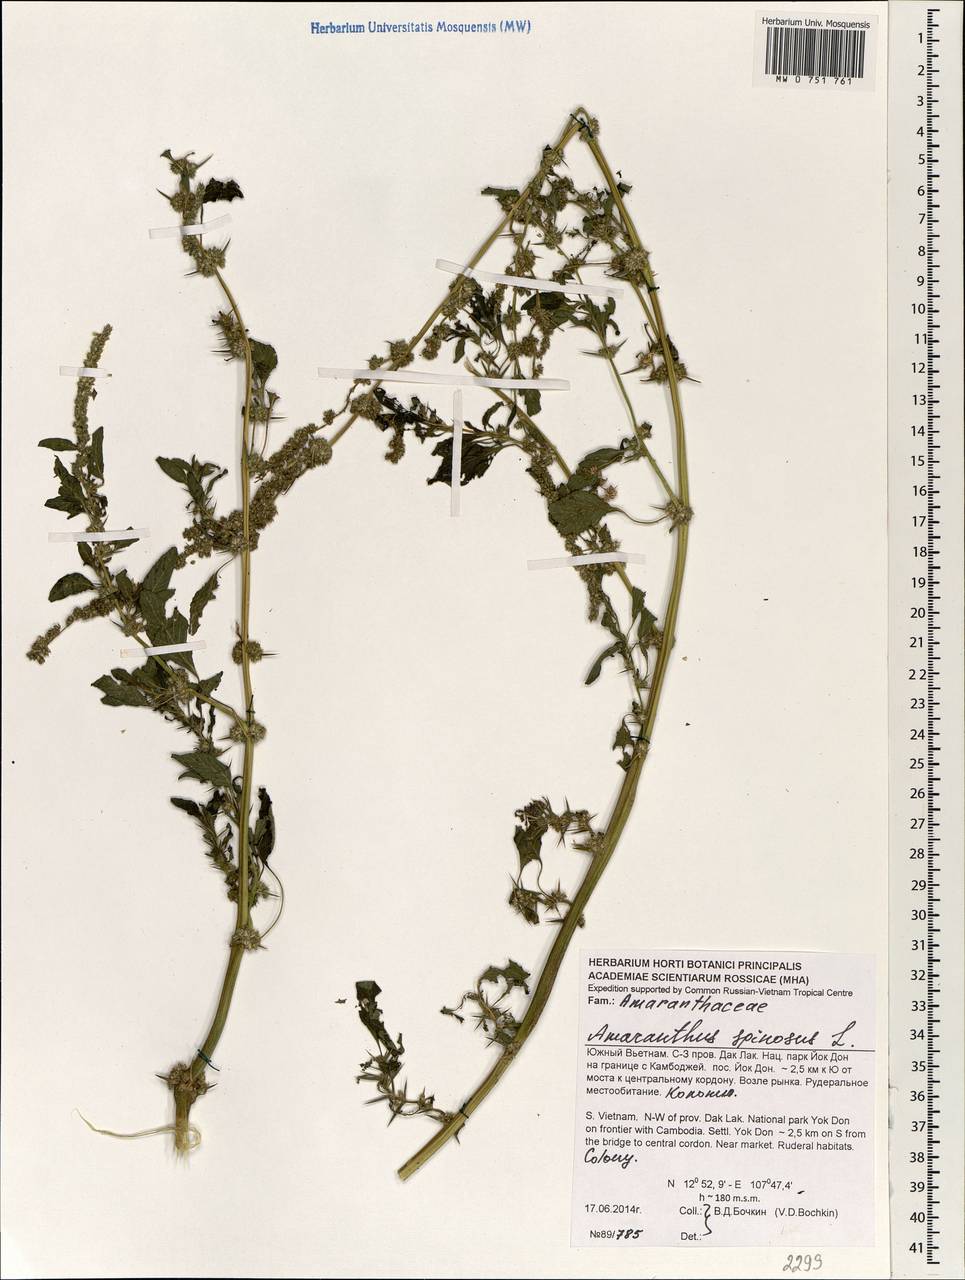 Amaranthus spinosus L., South Asia, South Asia (Asia outside ex-Soviet states and Mongolia) (ASIA) (Vietnam)